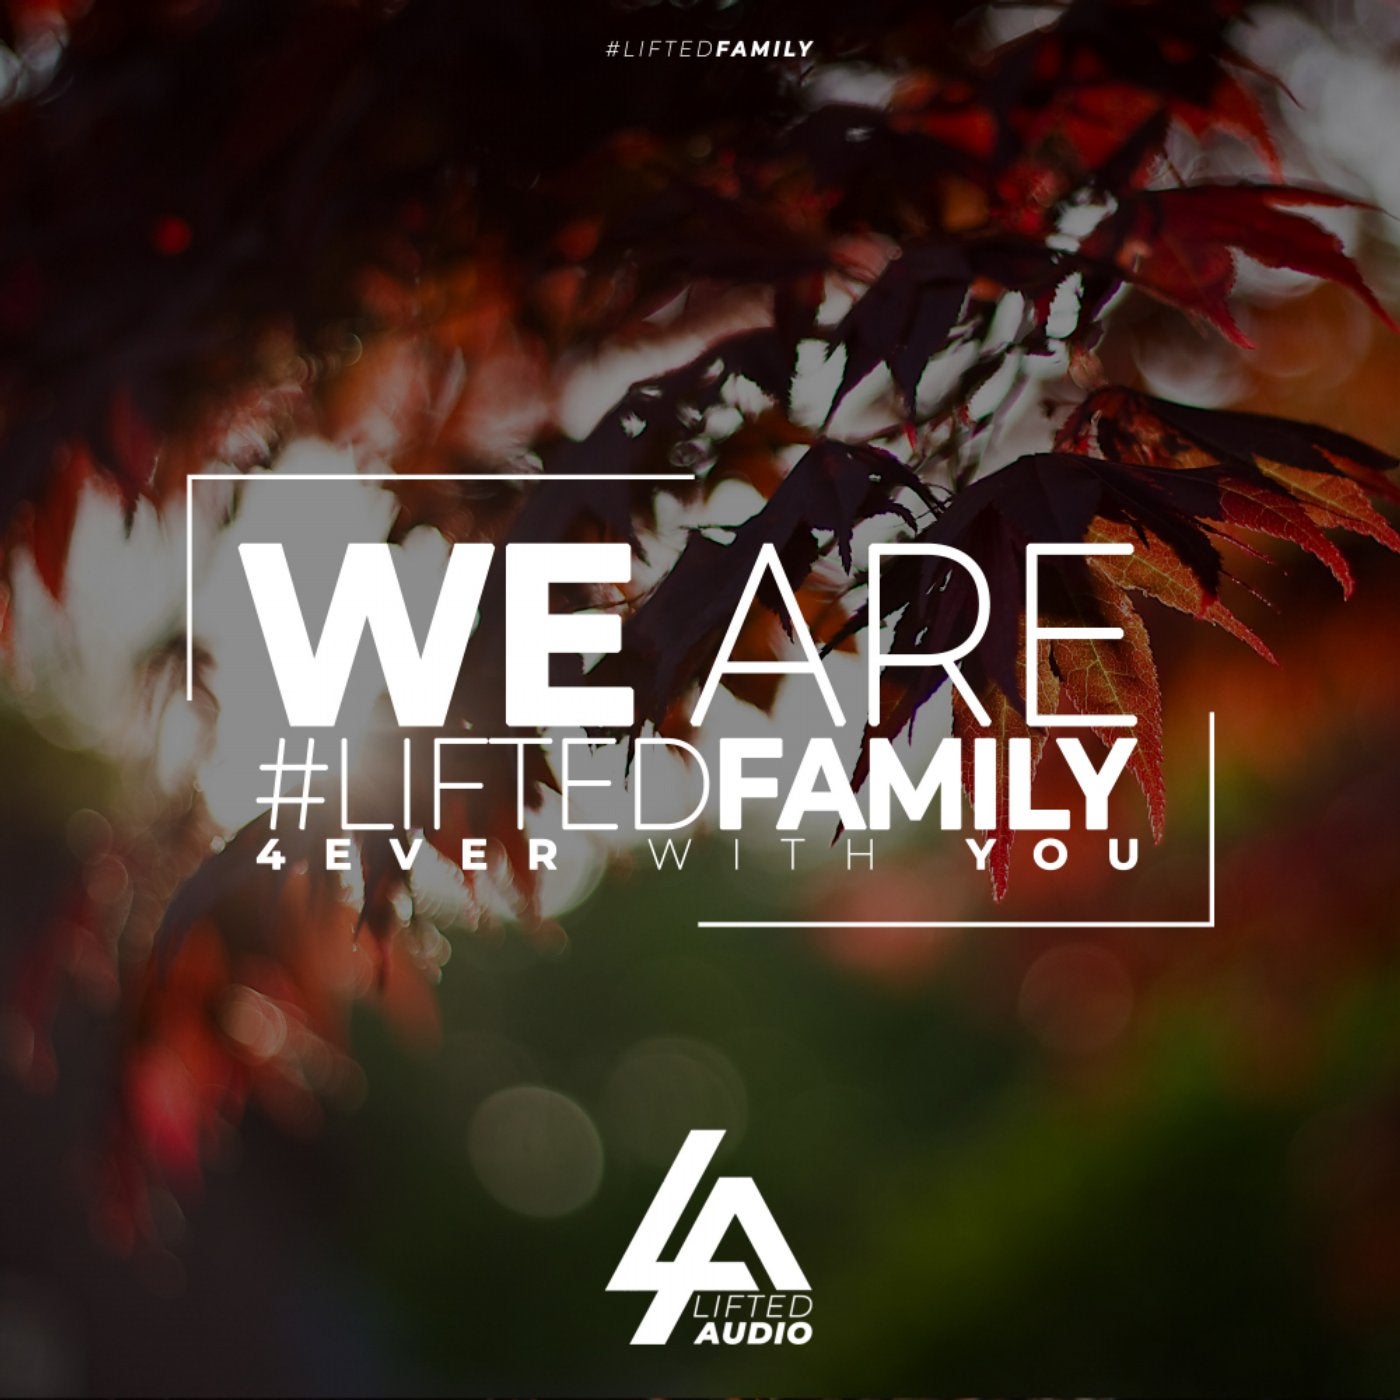 We Are #LiftedFamily 4ever with you